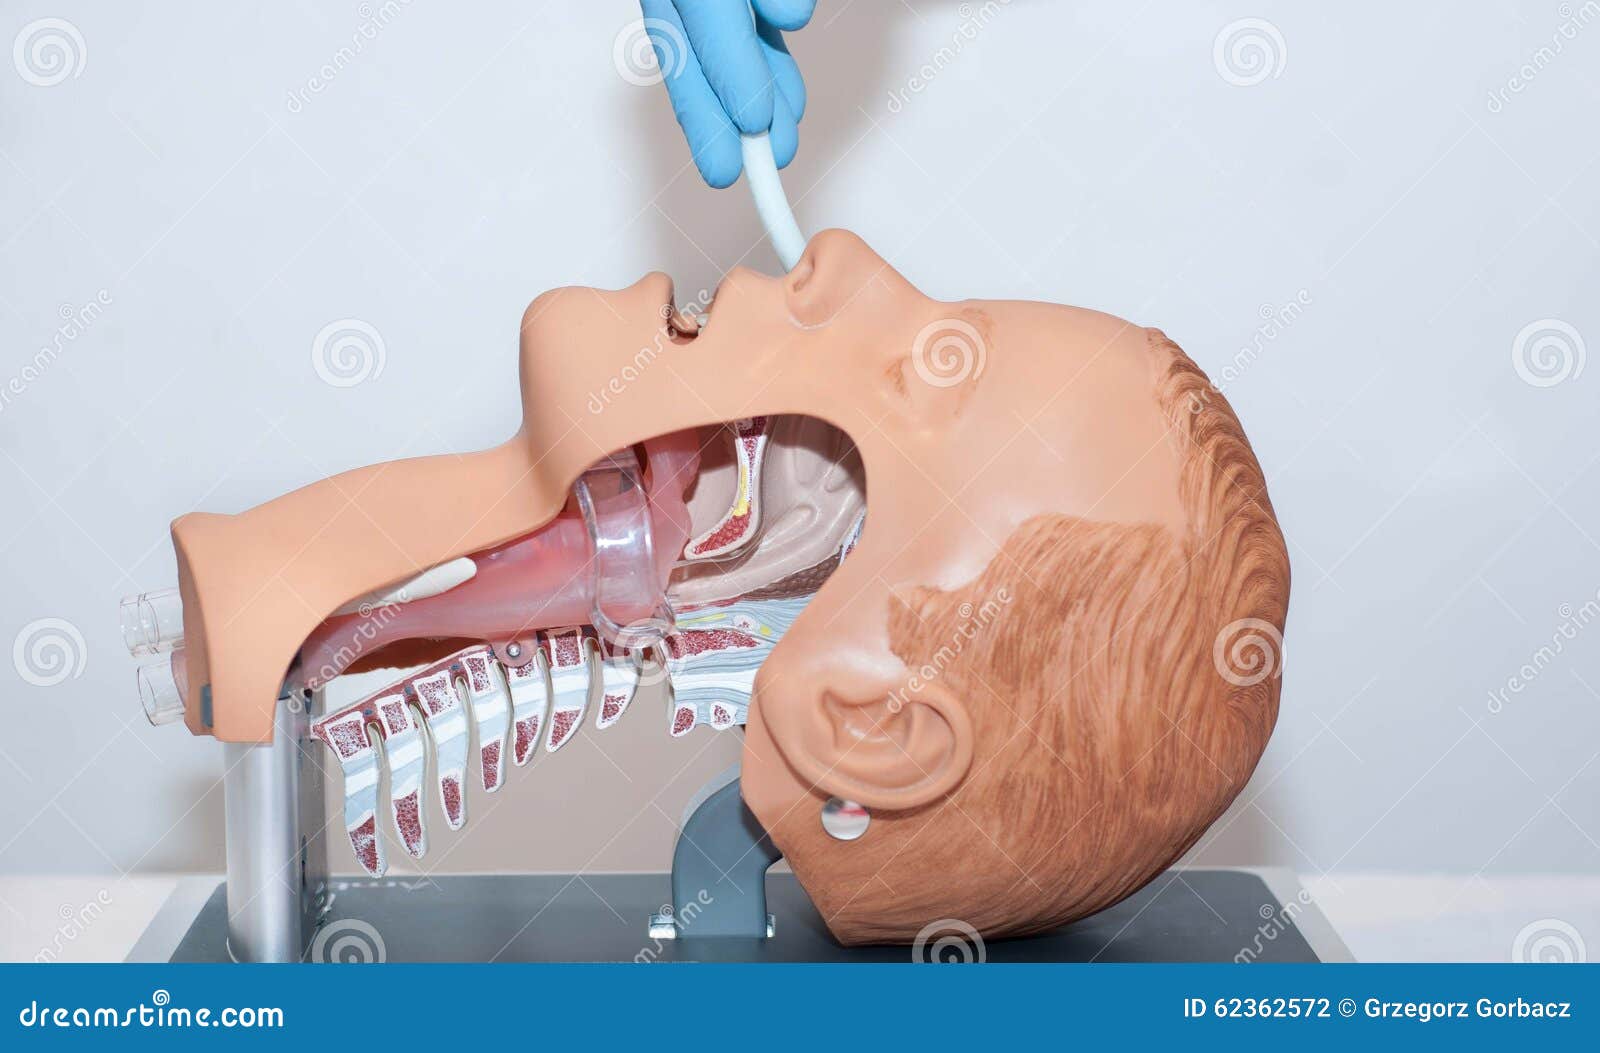 naso-pharyngeal tube used to open the airway used to open the airway